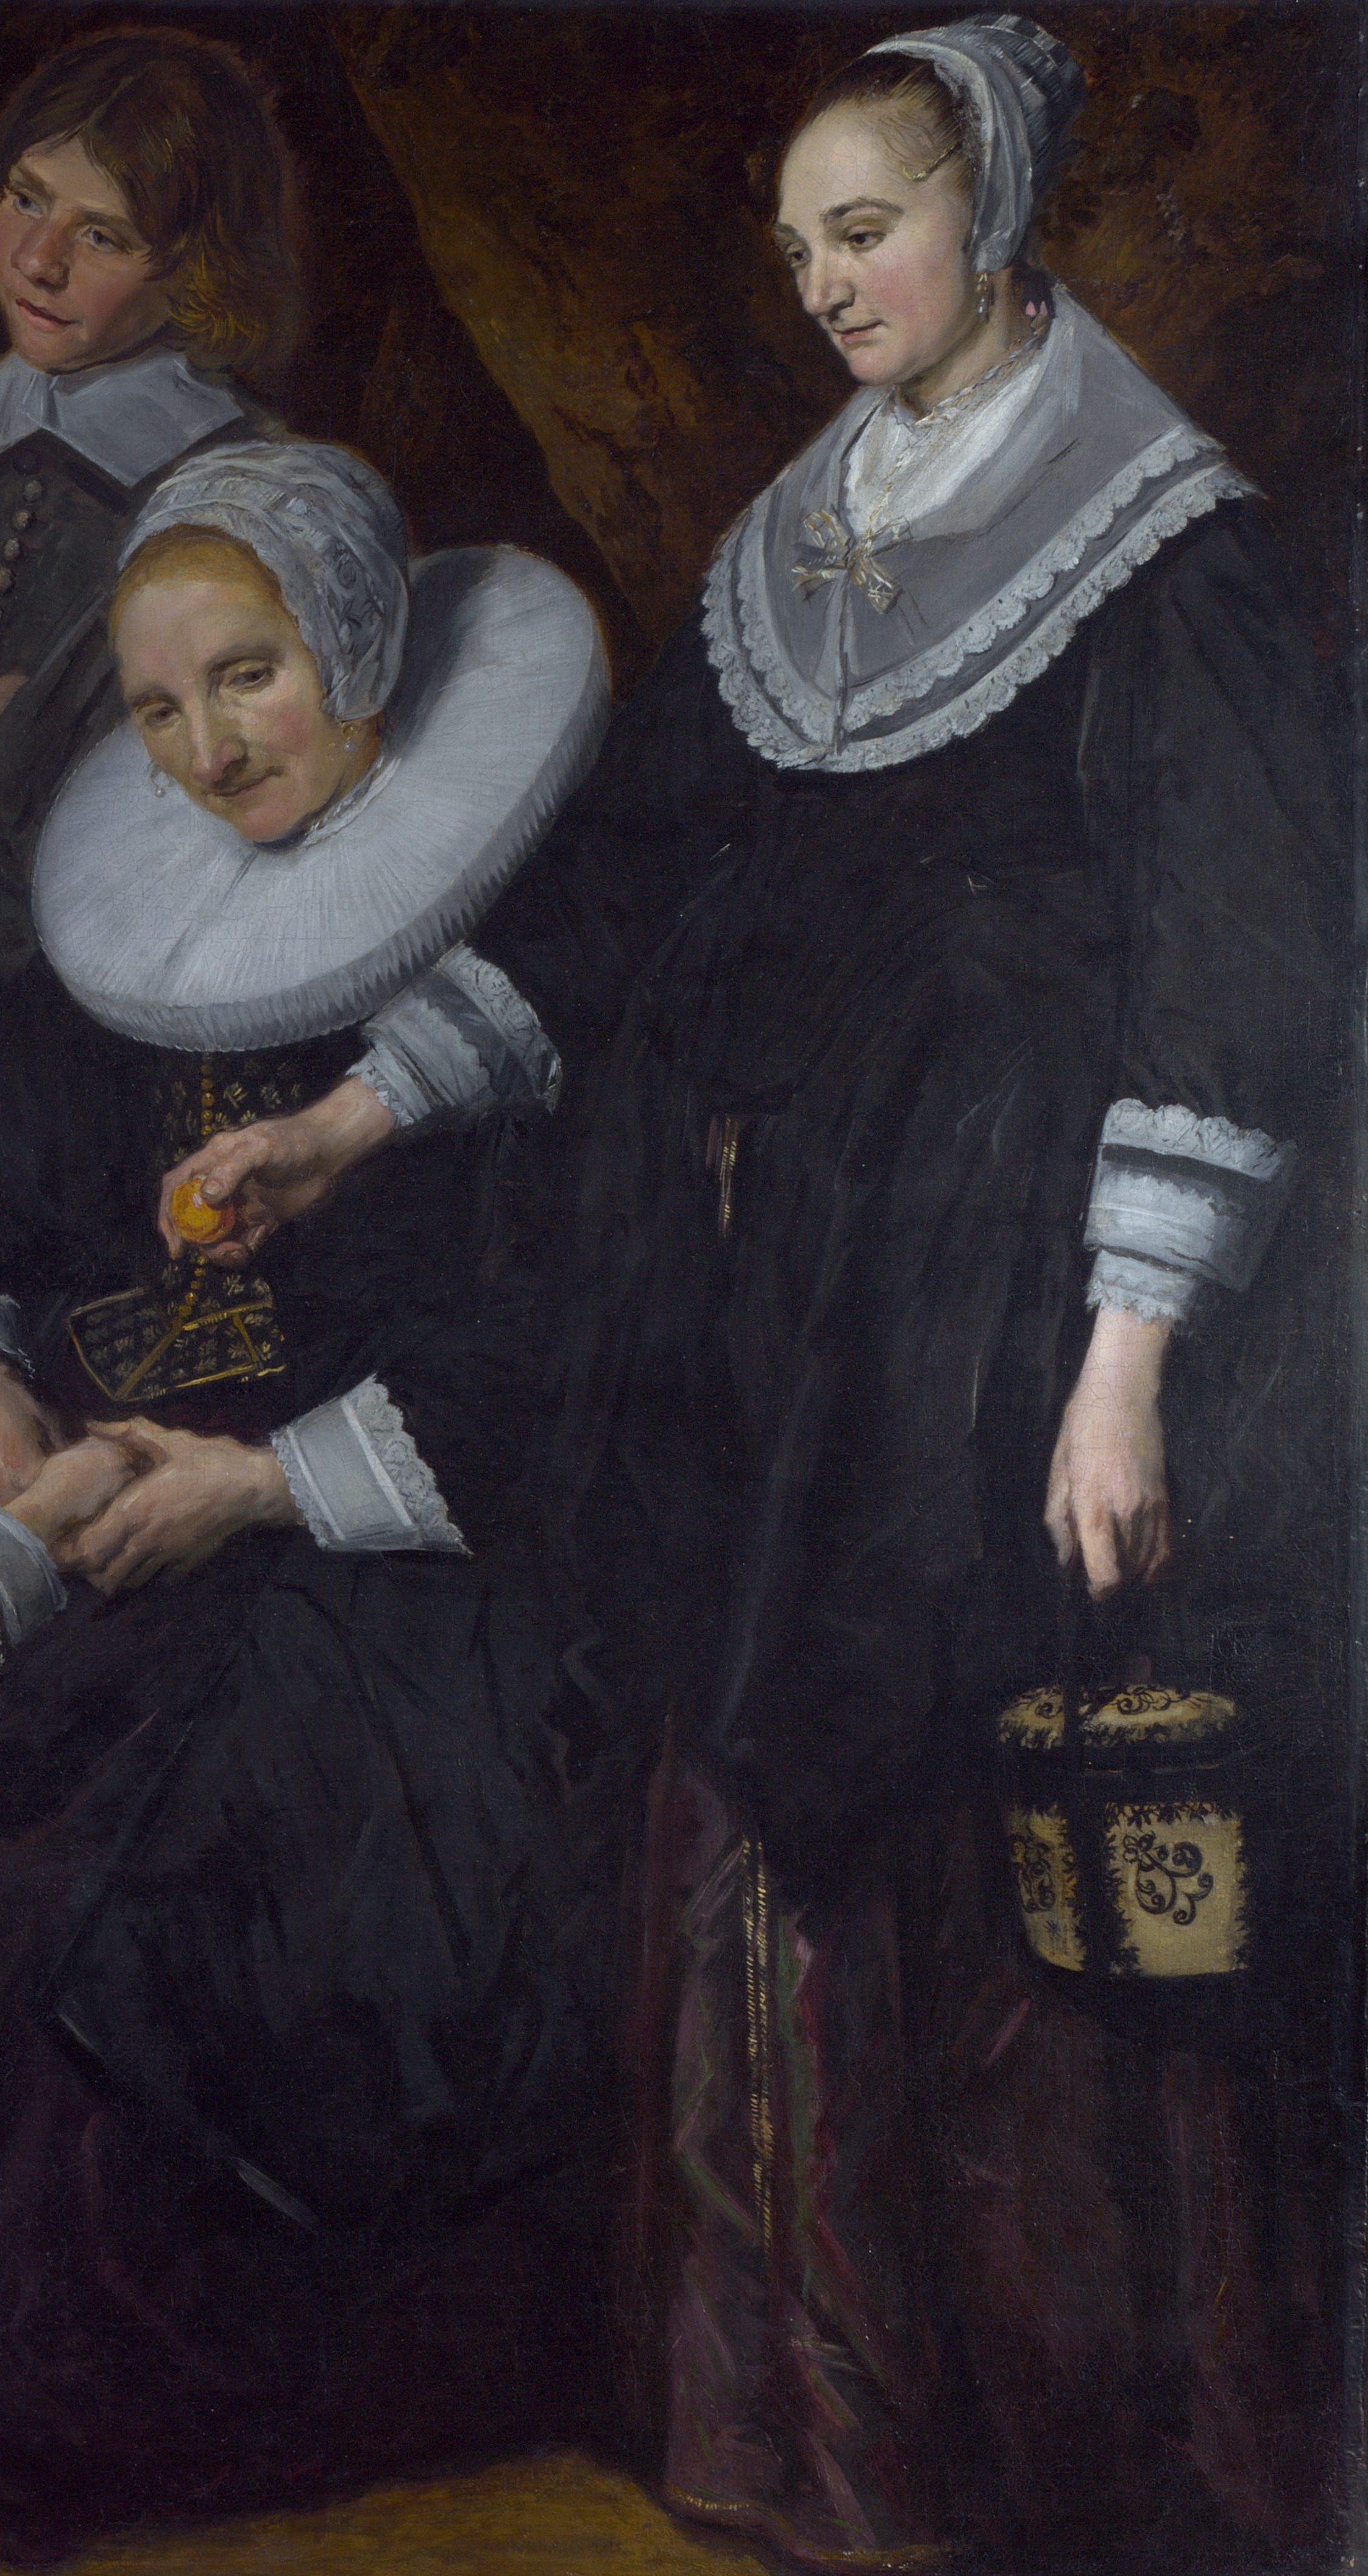 Frans Hals. Landscape with the family. Fragment 3. Portrait of two women